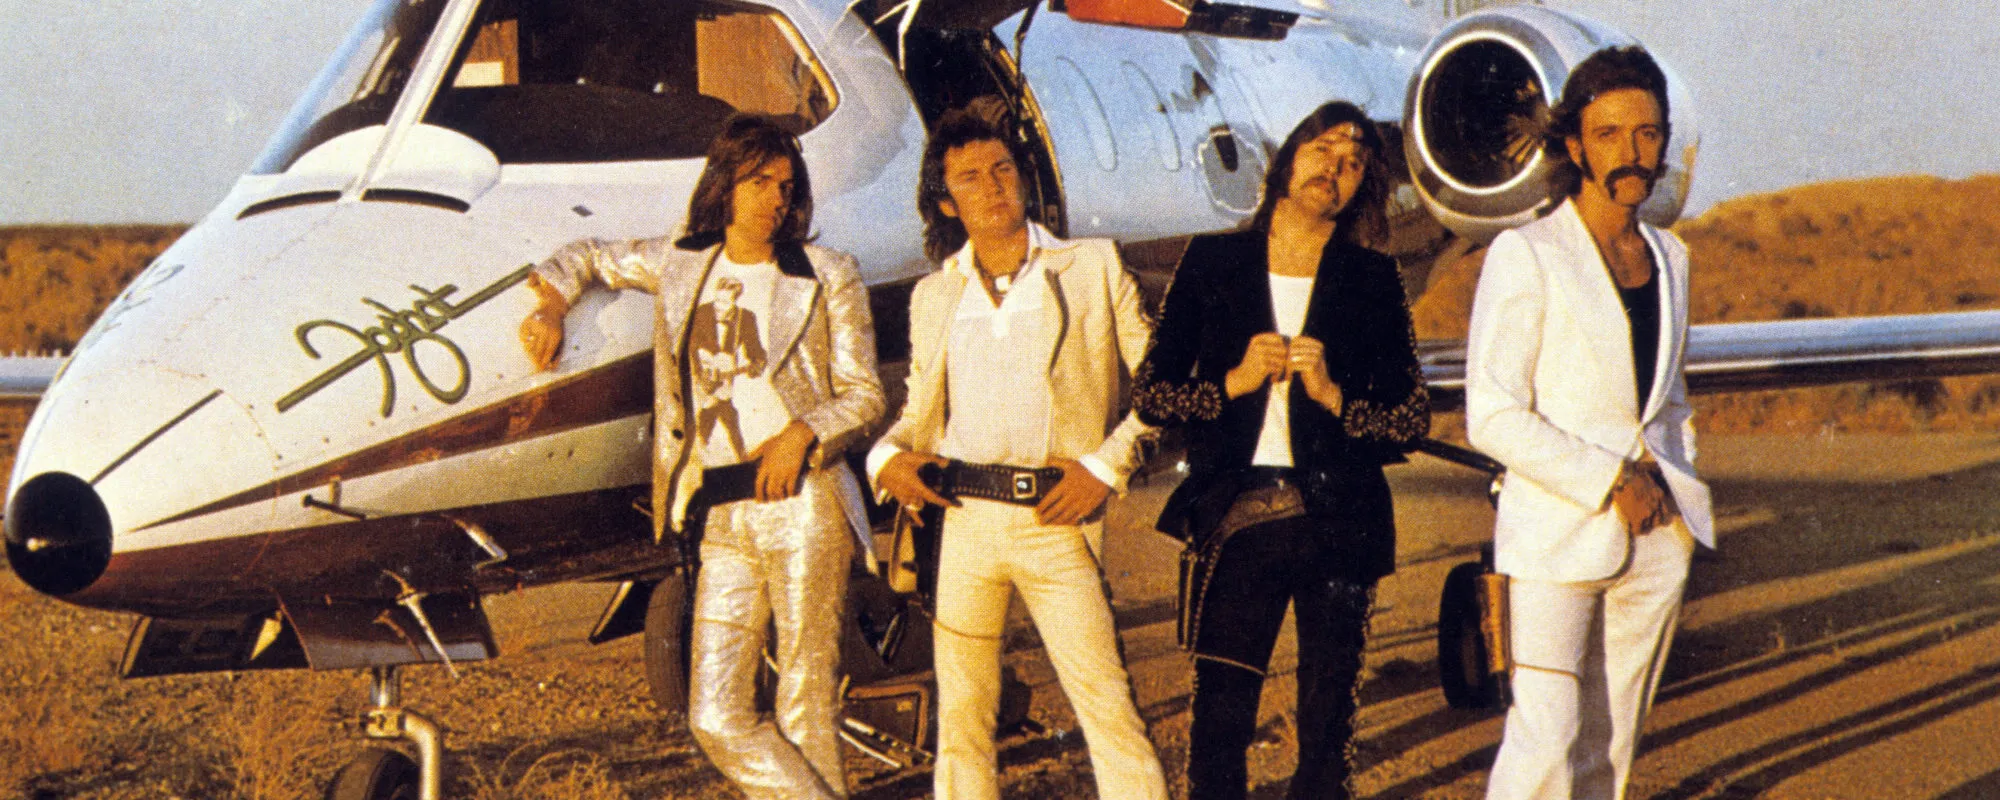 Behind the Meaning of “Slow Ride” by Foghat